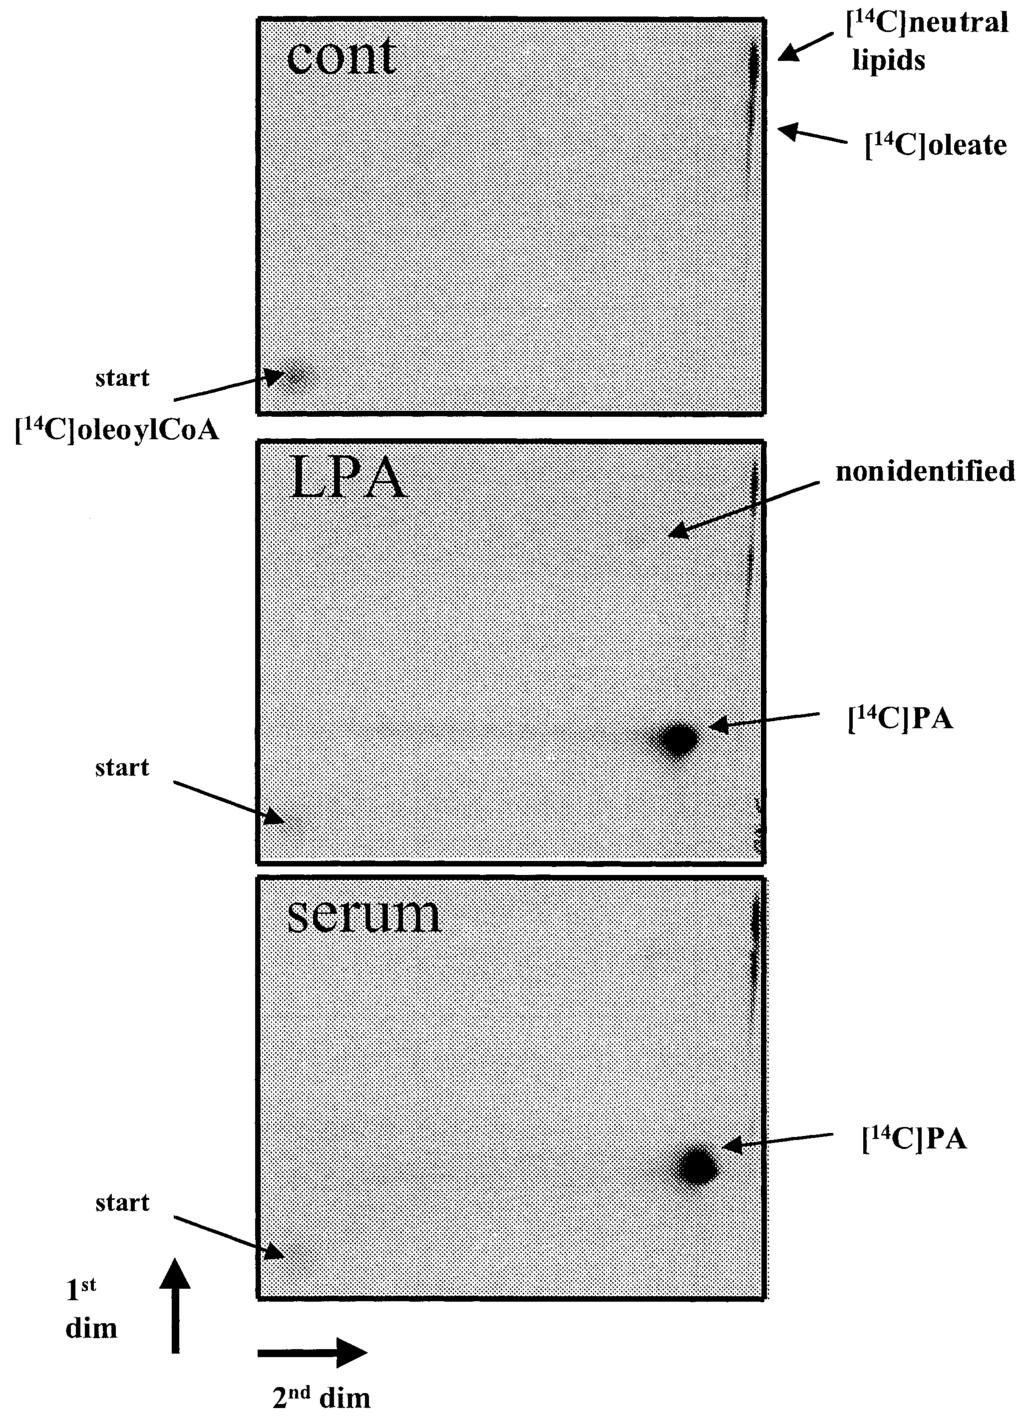 PA of a typical microsome preparation varied from 0.8 to 1 nmol/min per mg of protein. Preparation of acyl- and alkyl-lpa stock solutions Na salt 1-oleoyl-sn-glycero-3-phosphate (LPA) (from Sigma, St.